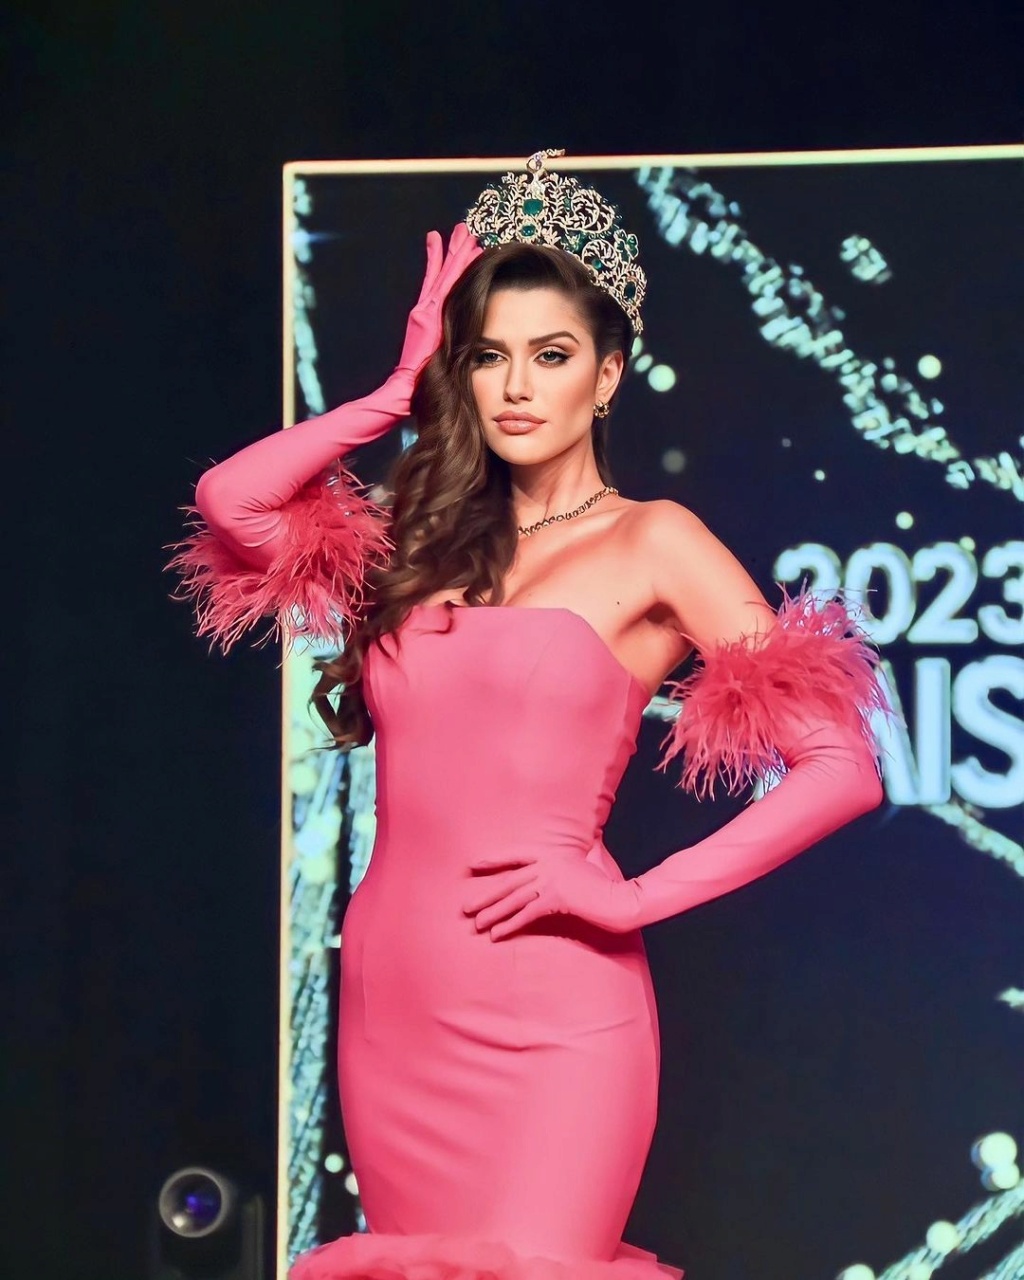 The Official Thread Of MISS GRAND INTERNATIONAL 2022 : ISABELLA MENIN from BRAZIL. - Page 2 34738711